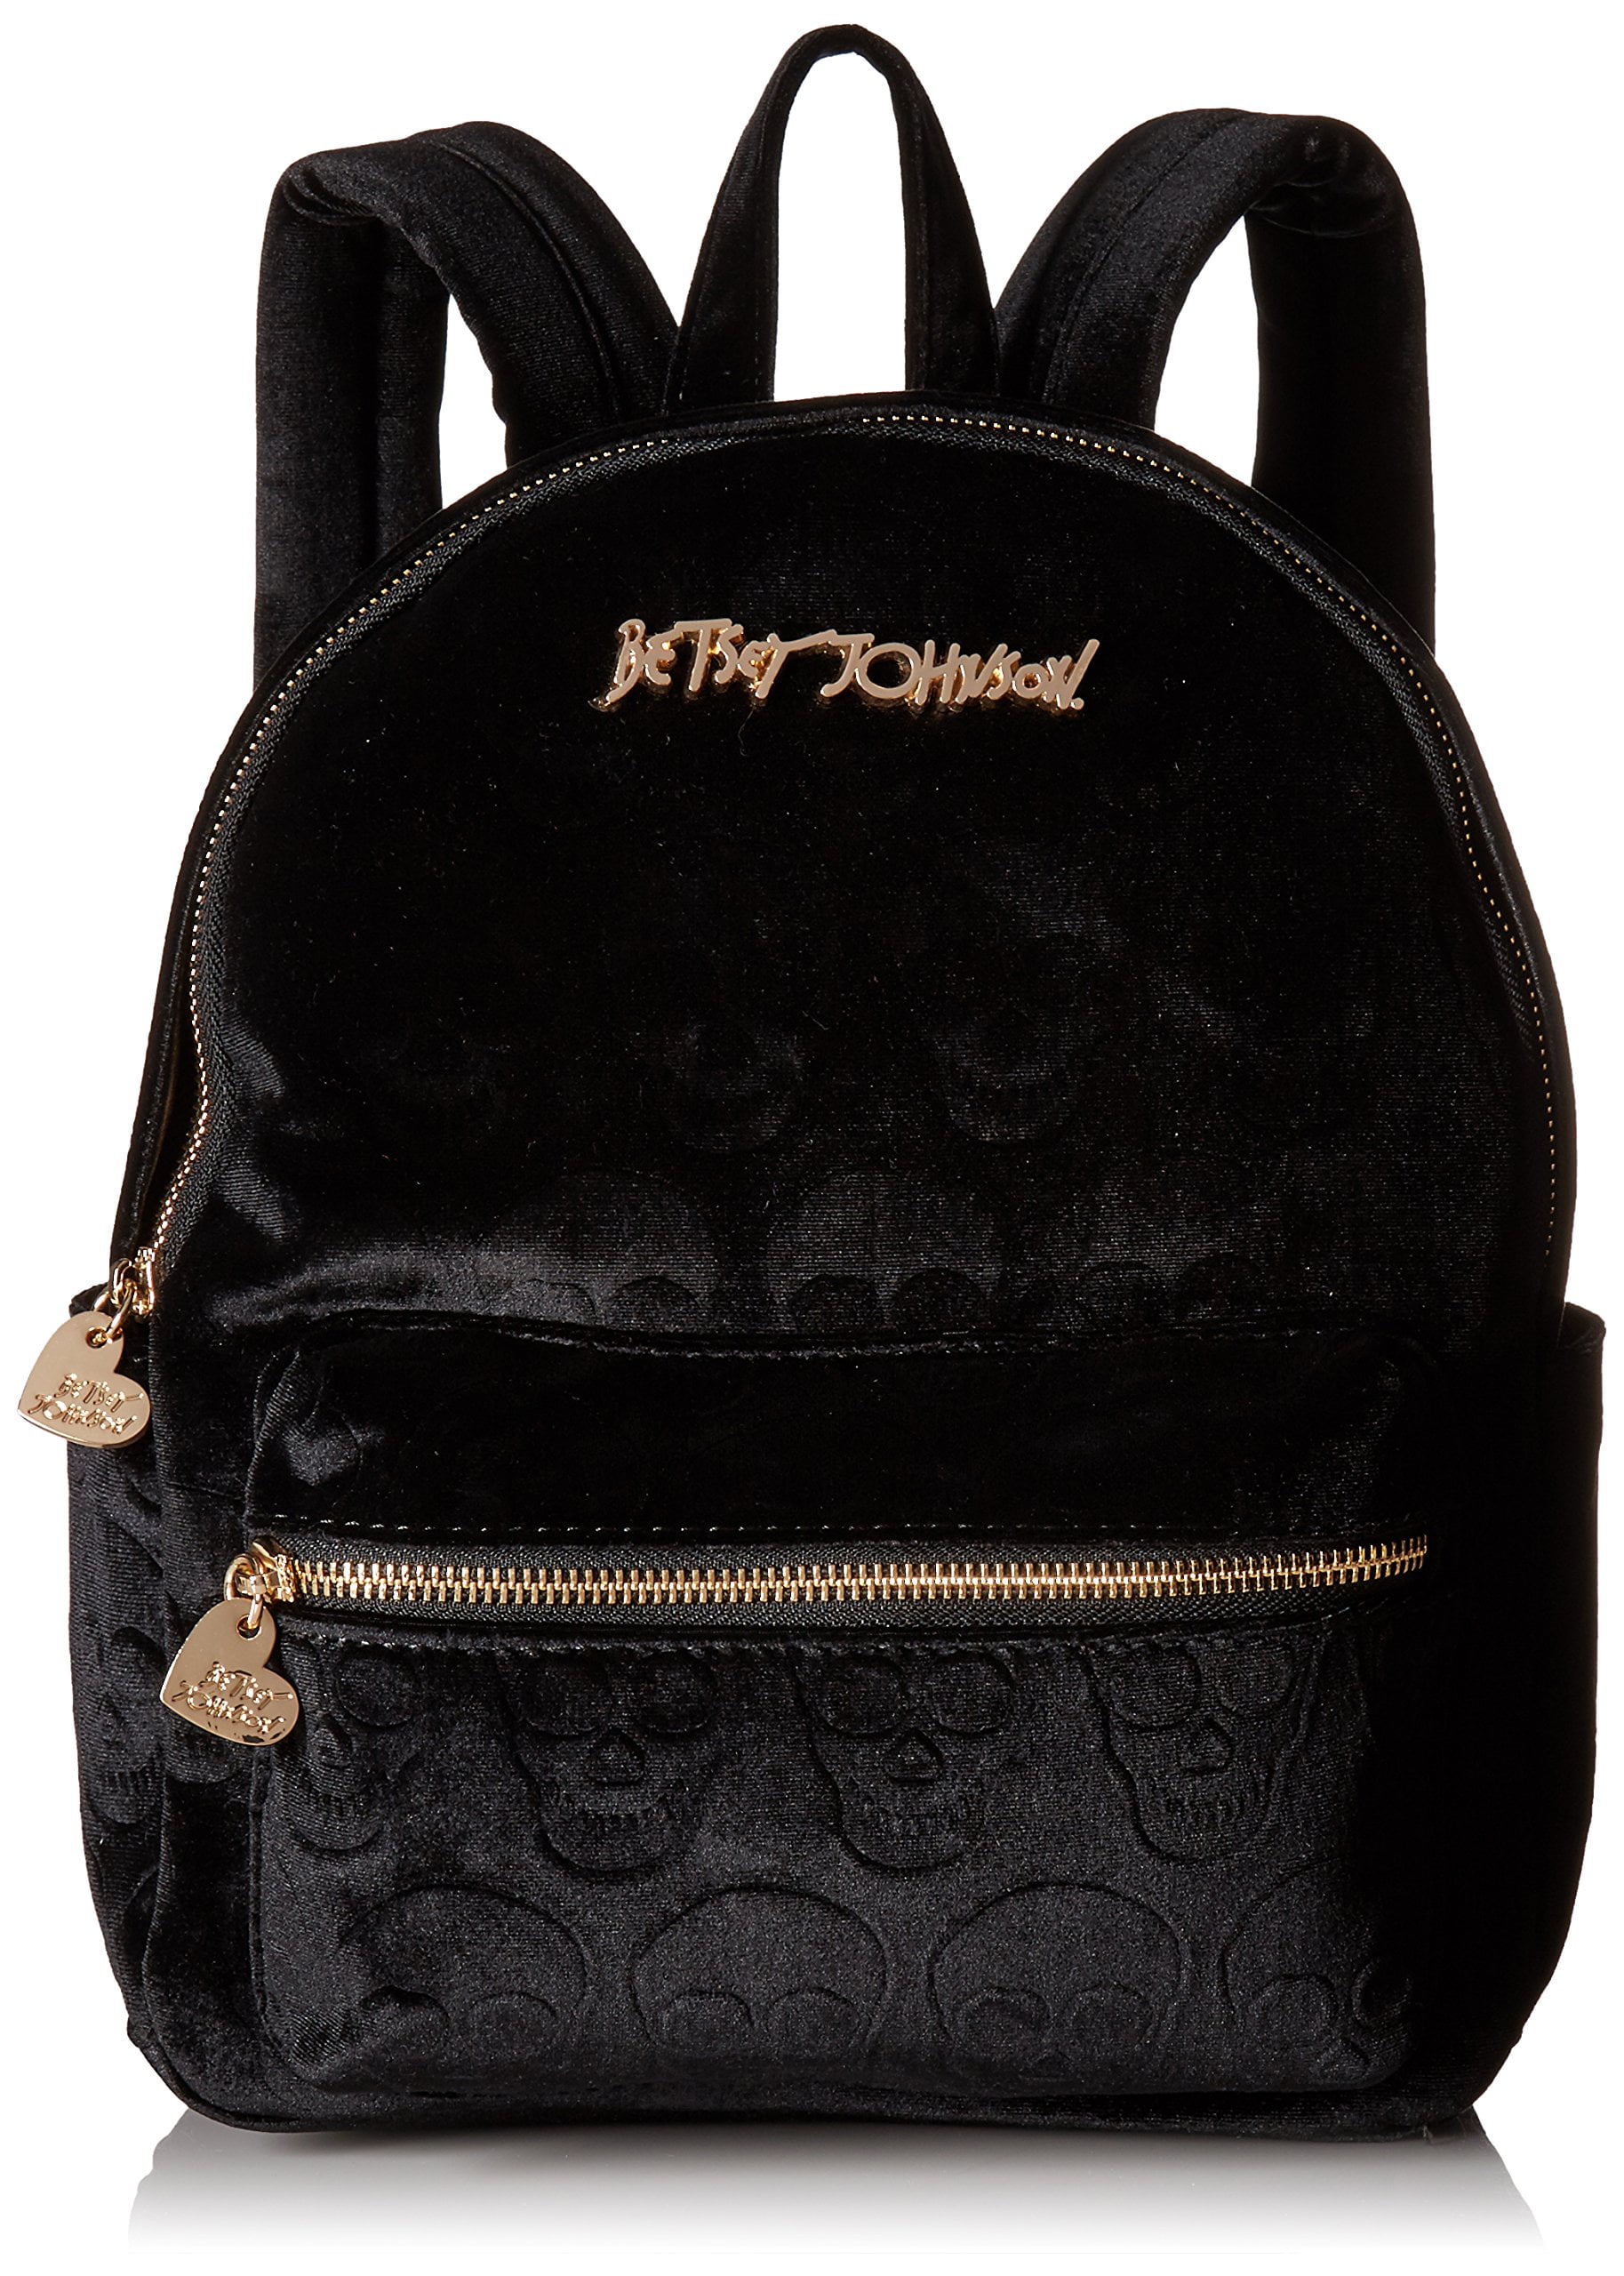 BETSEY JOHNSON BLACK Quilted Backpack Purse Bag Hearts Diaper Baby $39.99 -  PicClick